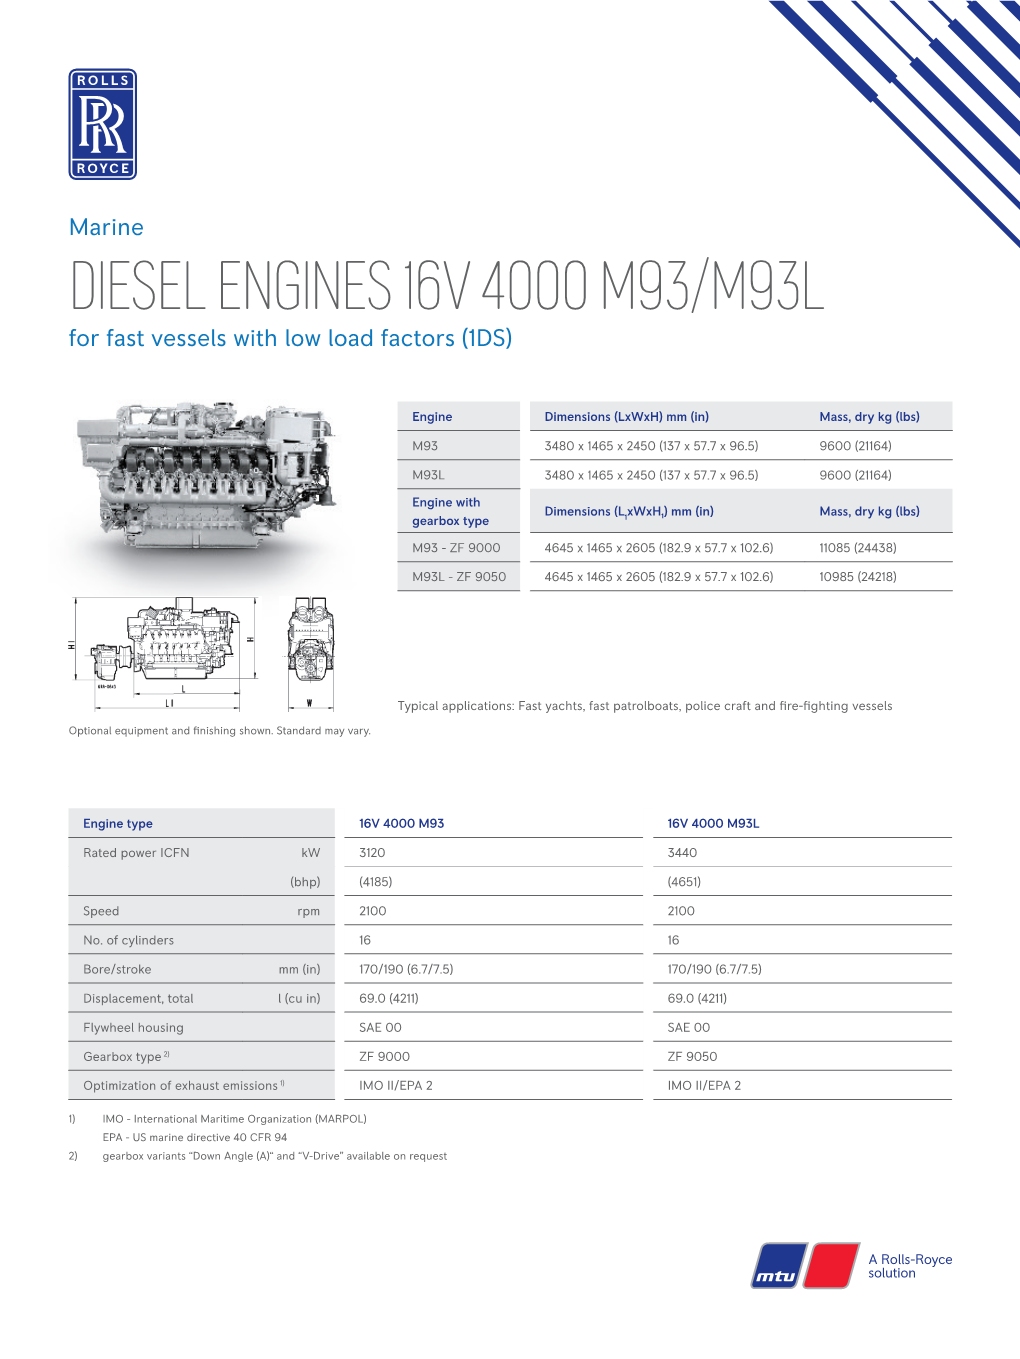 DIESEL ENGINES 16V 4000 M93/M93L for Fast Vessels with Low Load Factors (1DS)